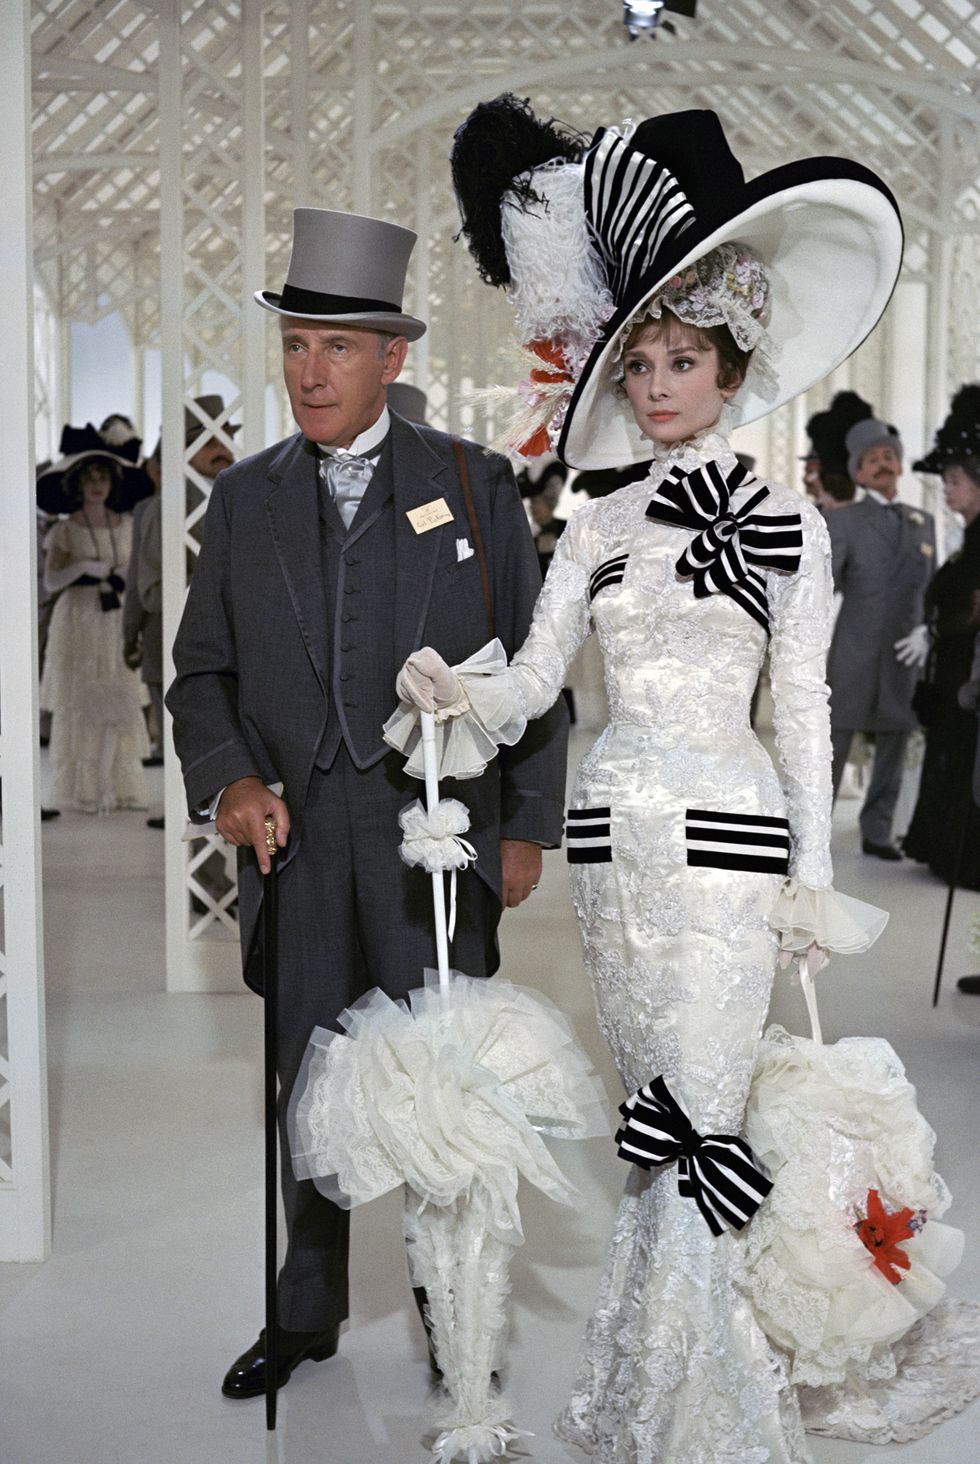 los angeles   december 24 wilfrid hyde white as colonel hugh pickering and audrey hepburn as eliza doolittle in my fair lady  original release date december 25, 1964  photo by cbs via getty images